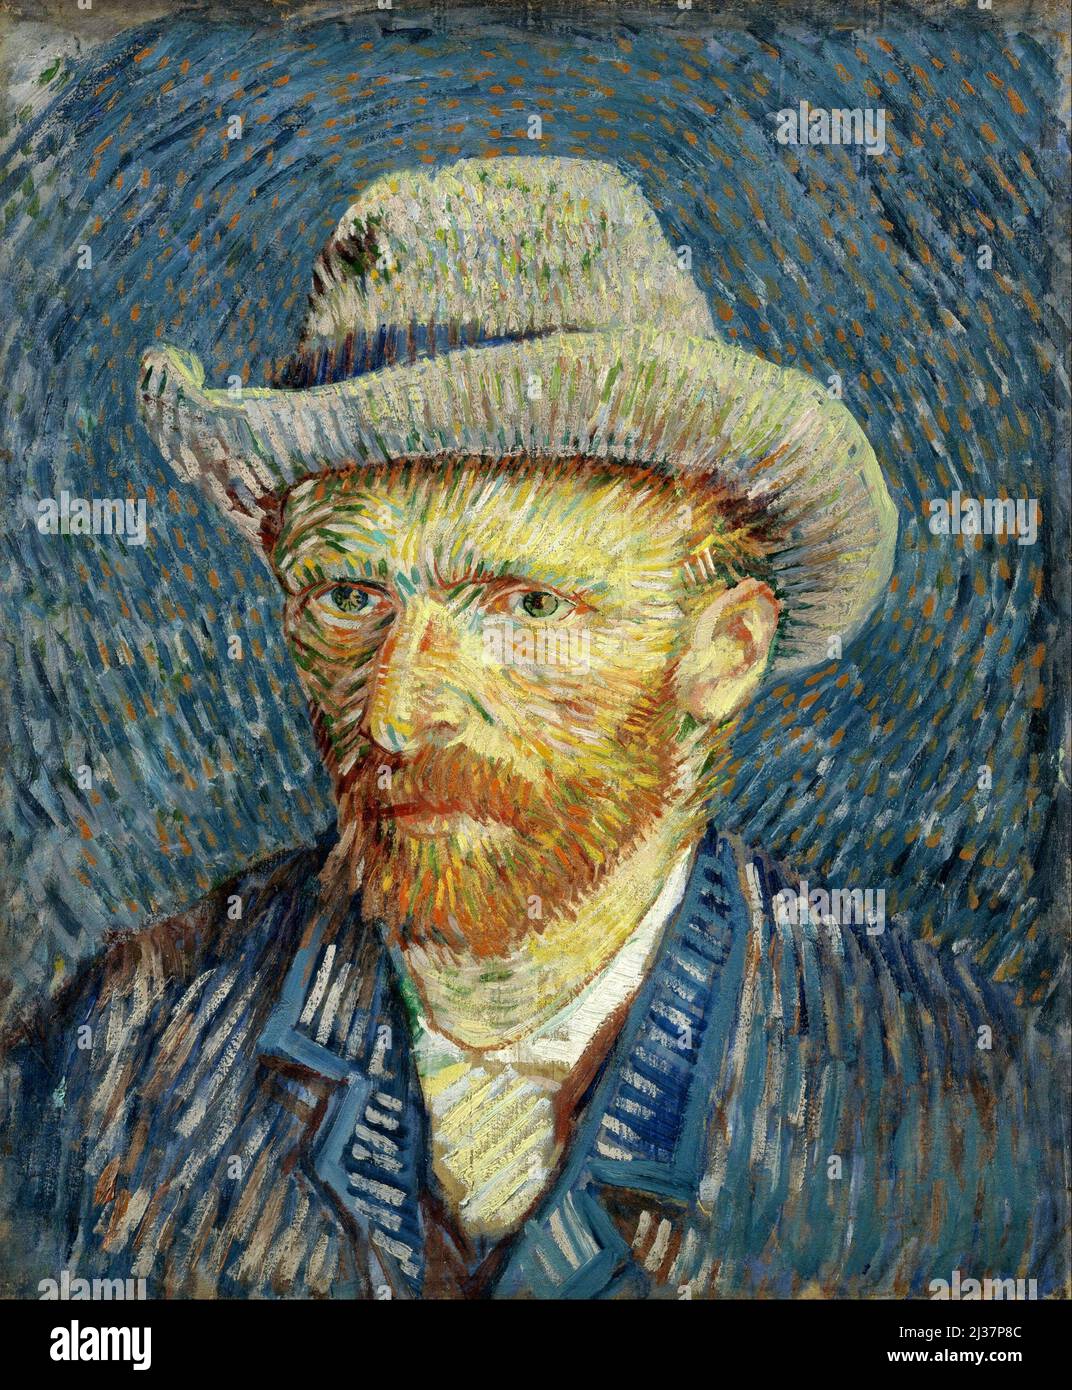 Vincent van Gogh - Self Portrait with Gray Felt Hat, c. 1887. Vincent Willem  van Gogh (1853-1890) was a Dutch painter, one of the greatest exponents  Stock Photo - Alamy